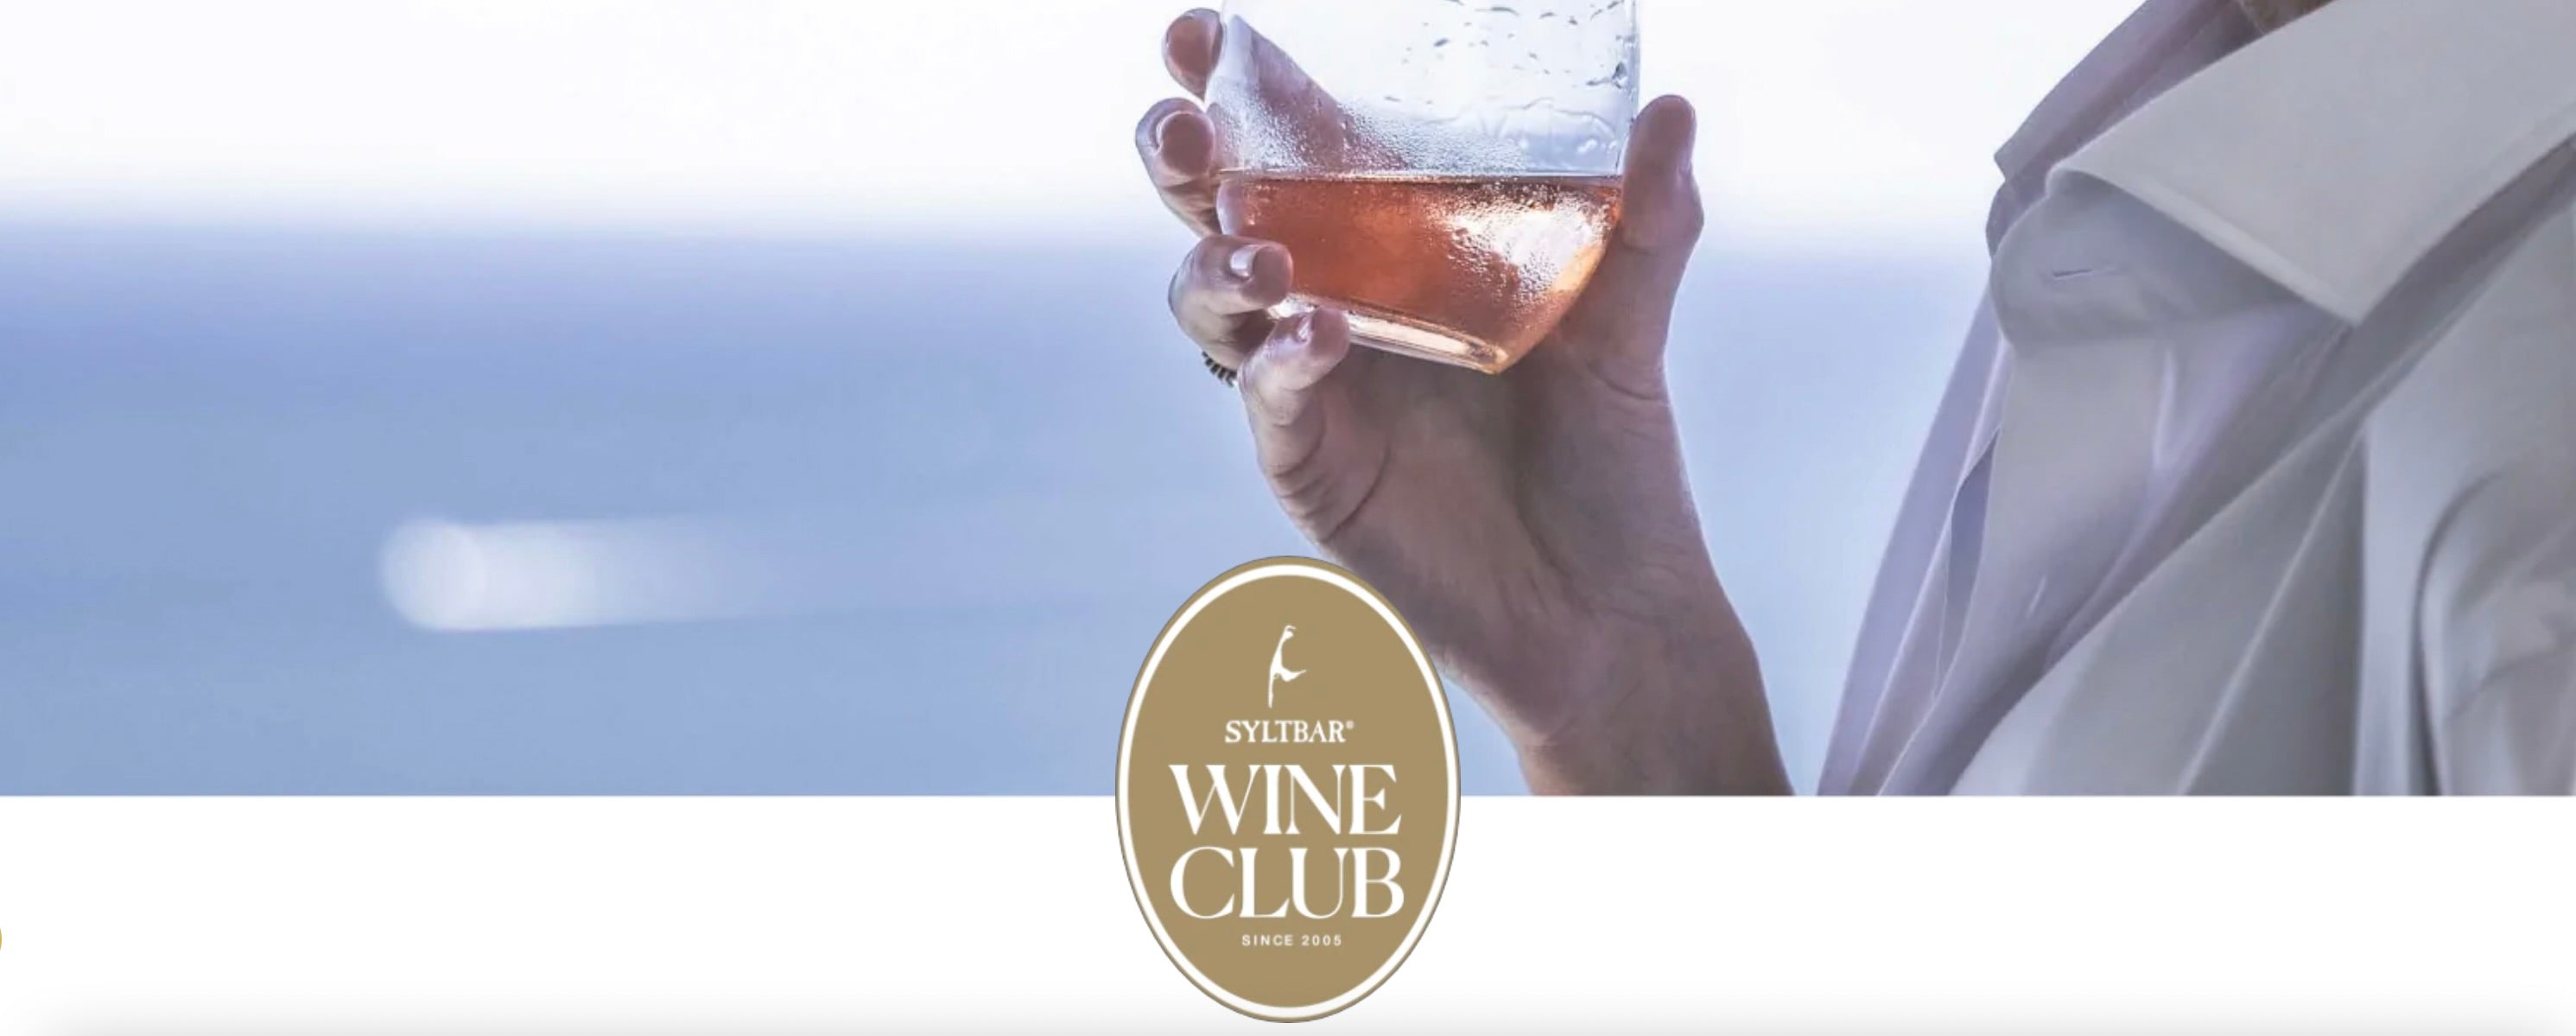 Are Wine Clubs Worth It?